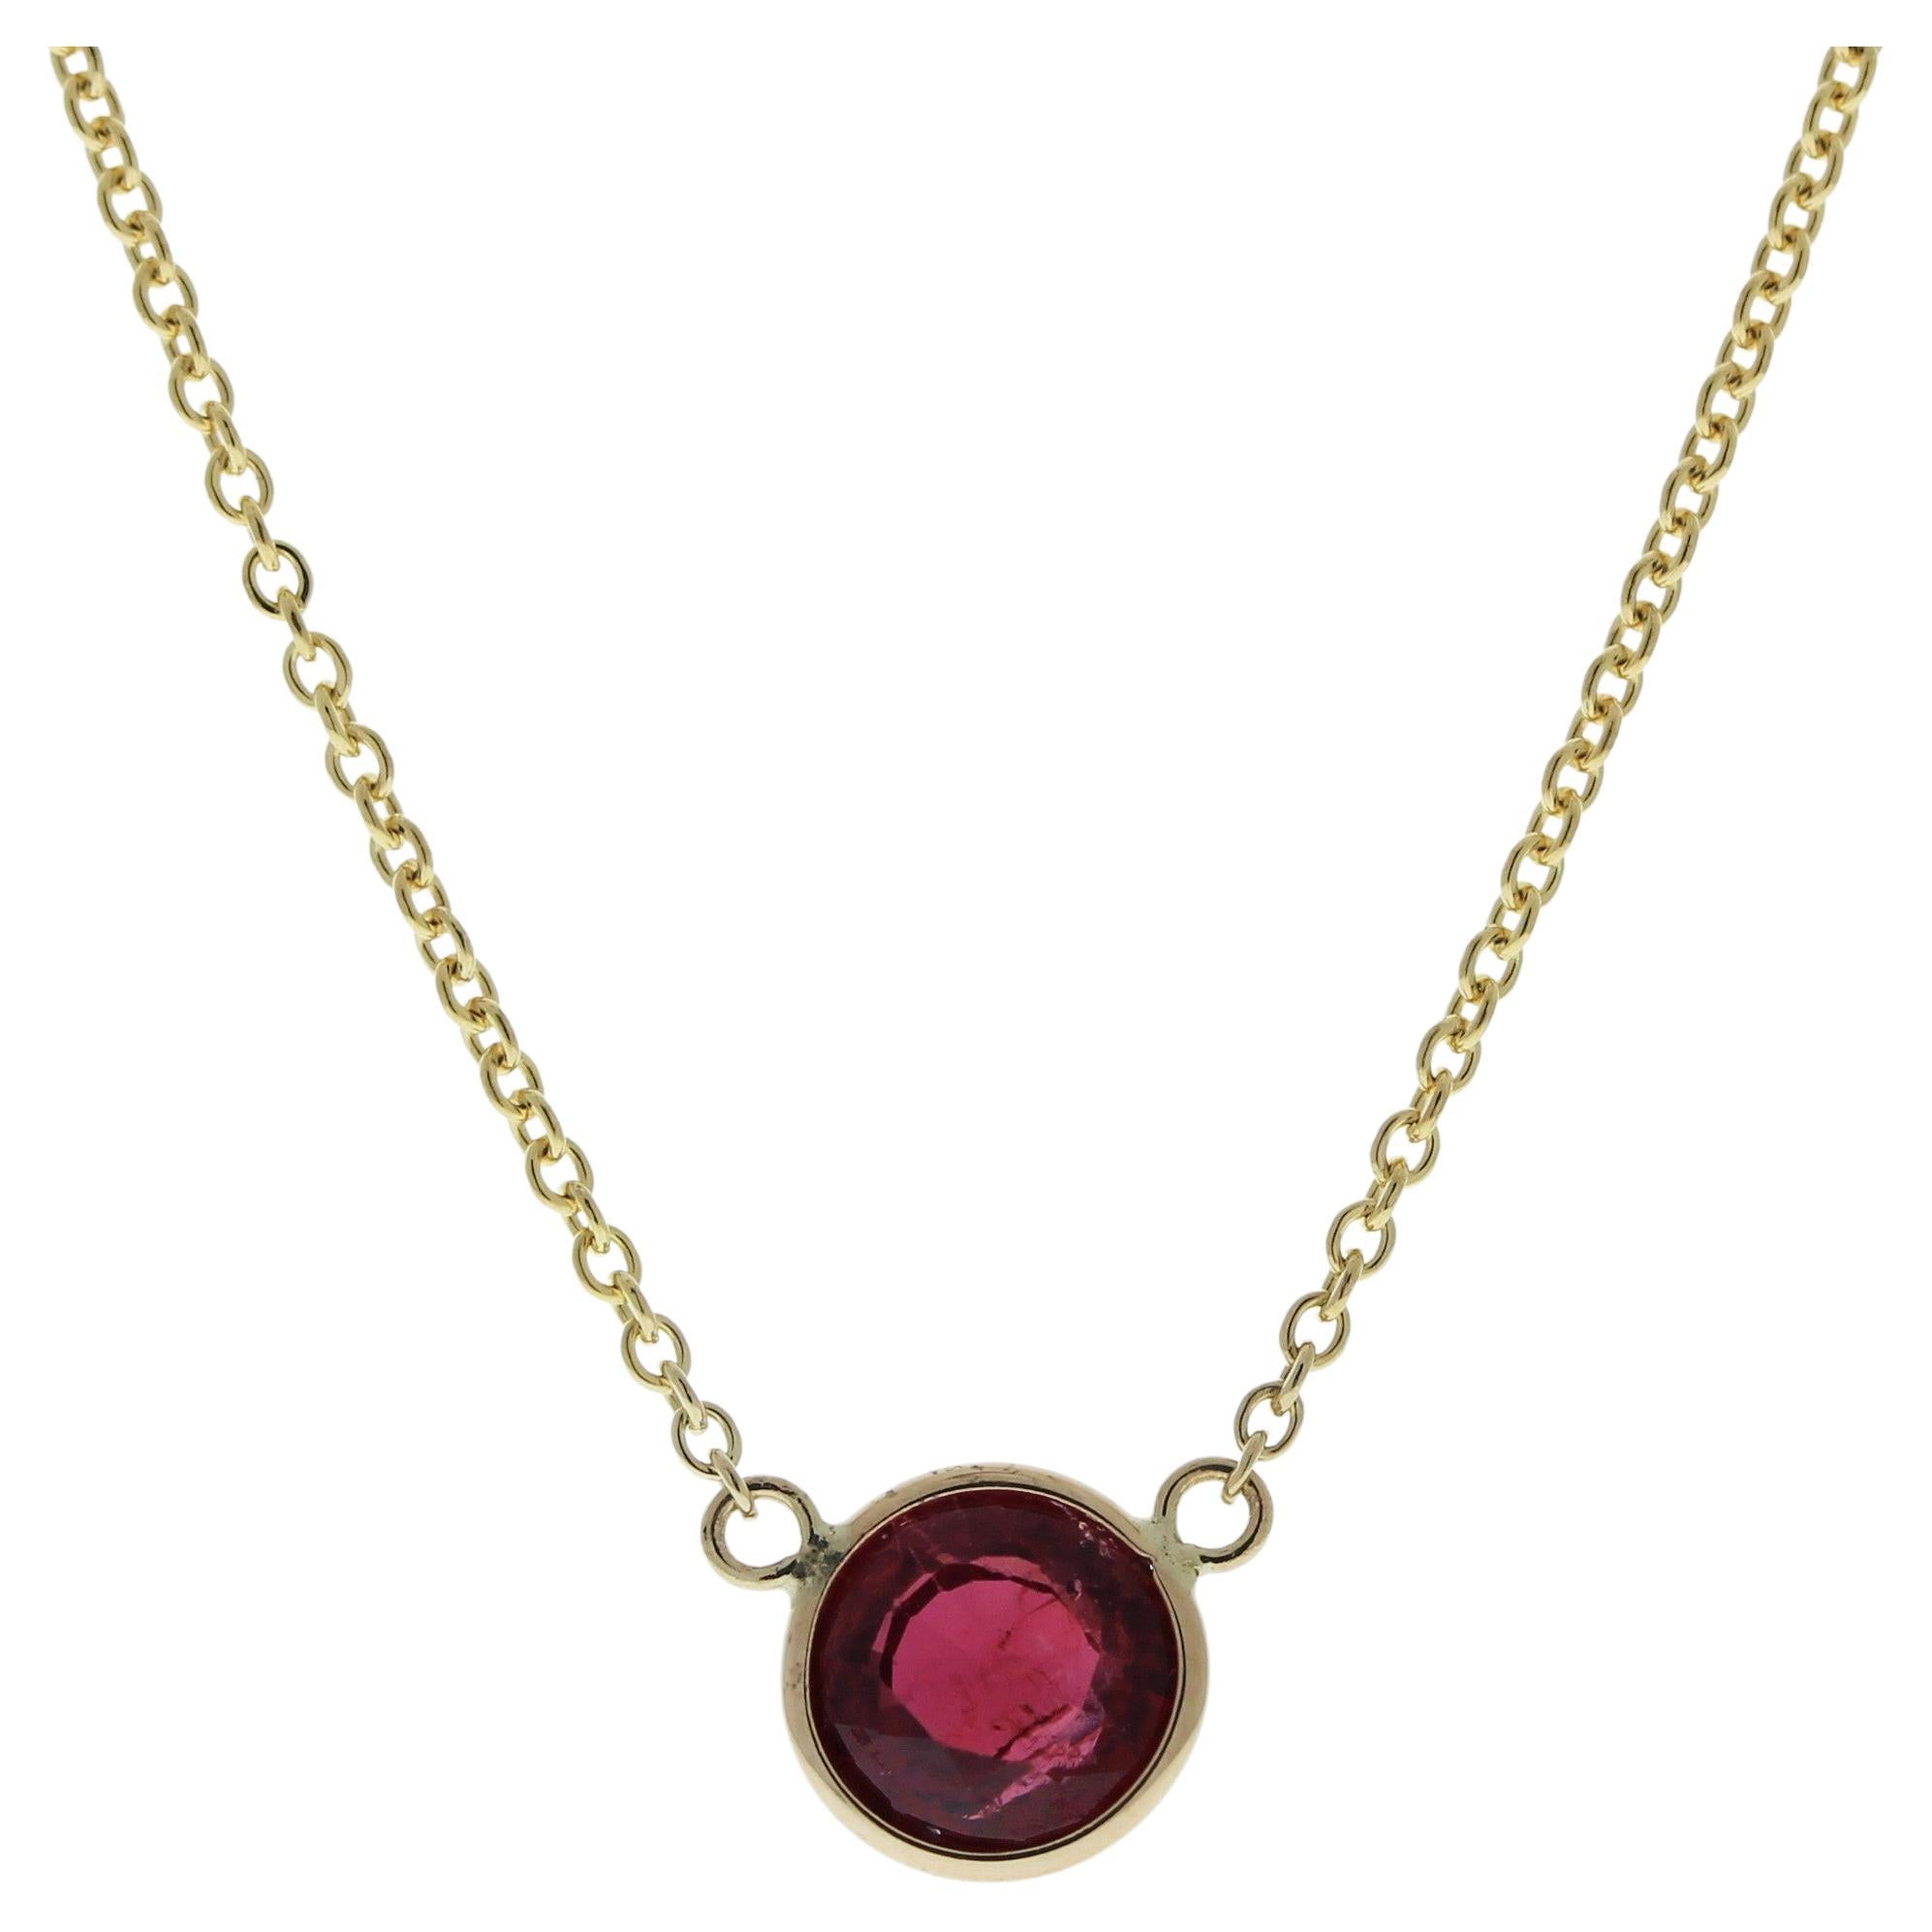 1.14 Carat Round Ruby Fashion Necklaces In 14k Yellow Gold For Sale